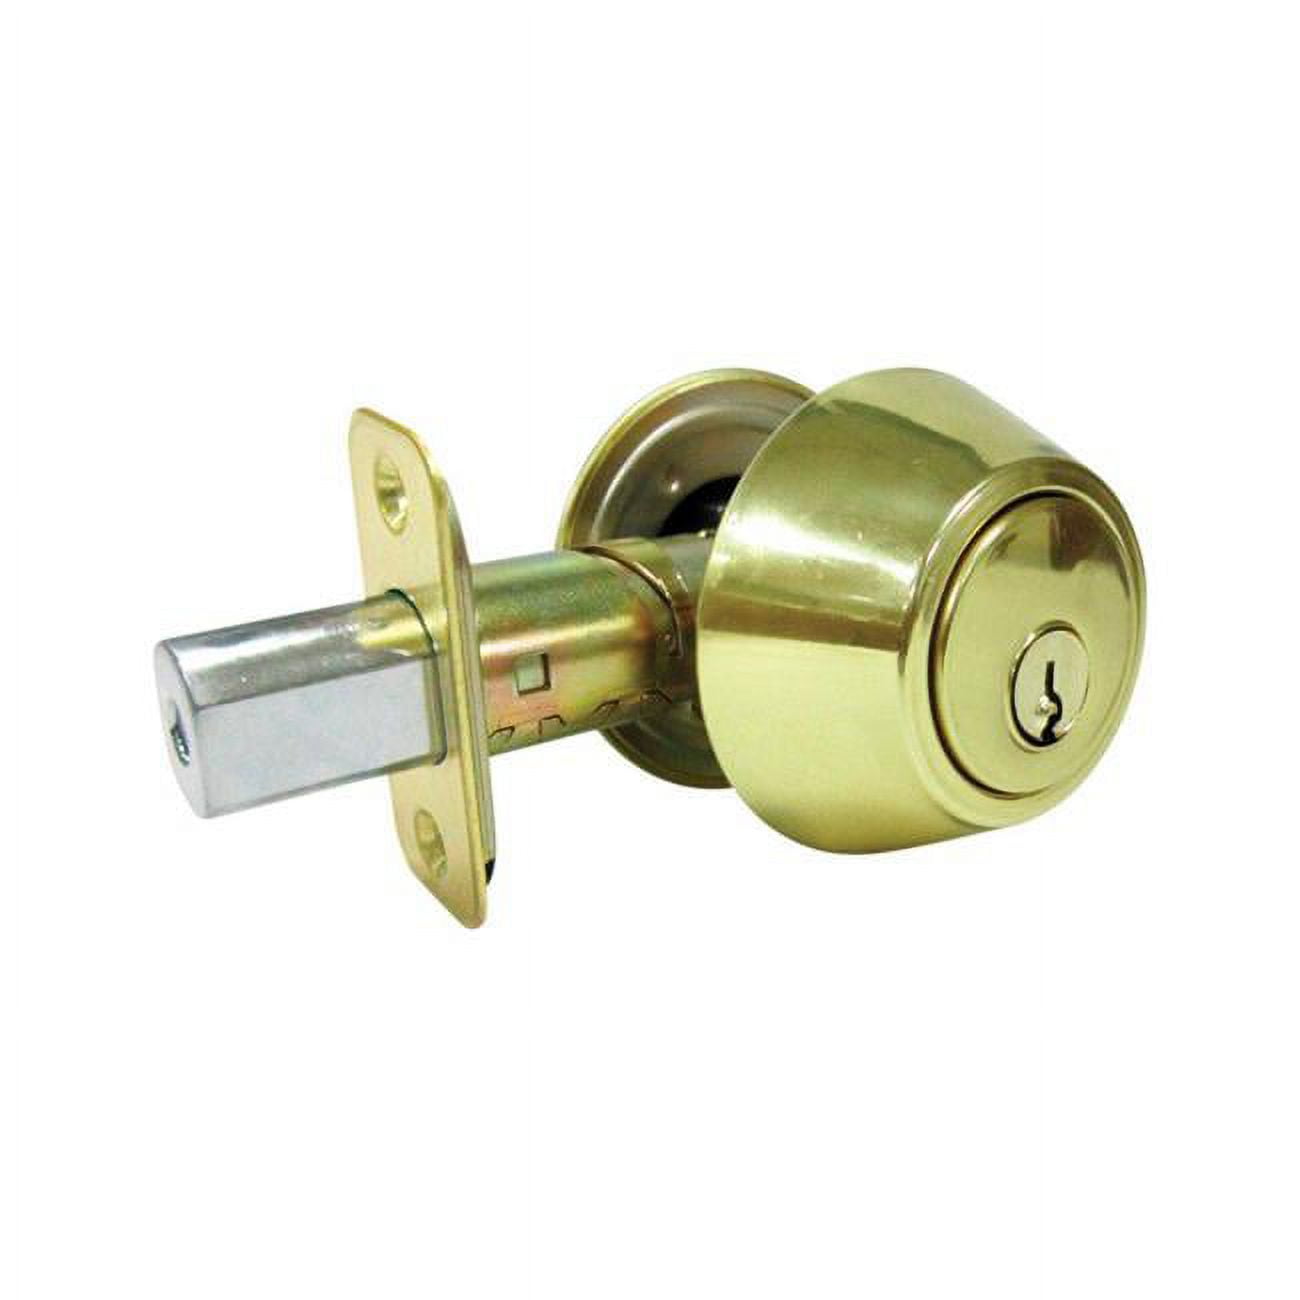 5002073 Polished Brass Metal Double Cylinder Lock - Ansi Grade 3, 1.75 In.